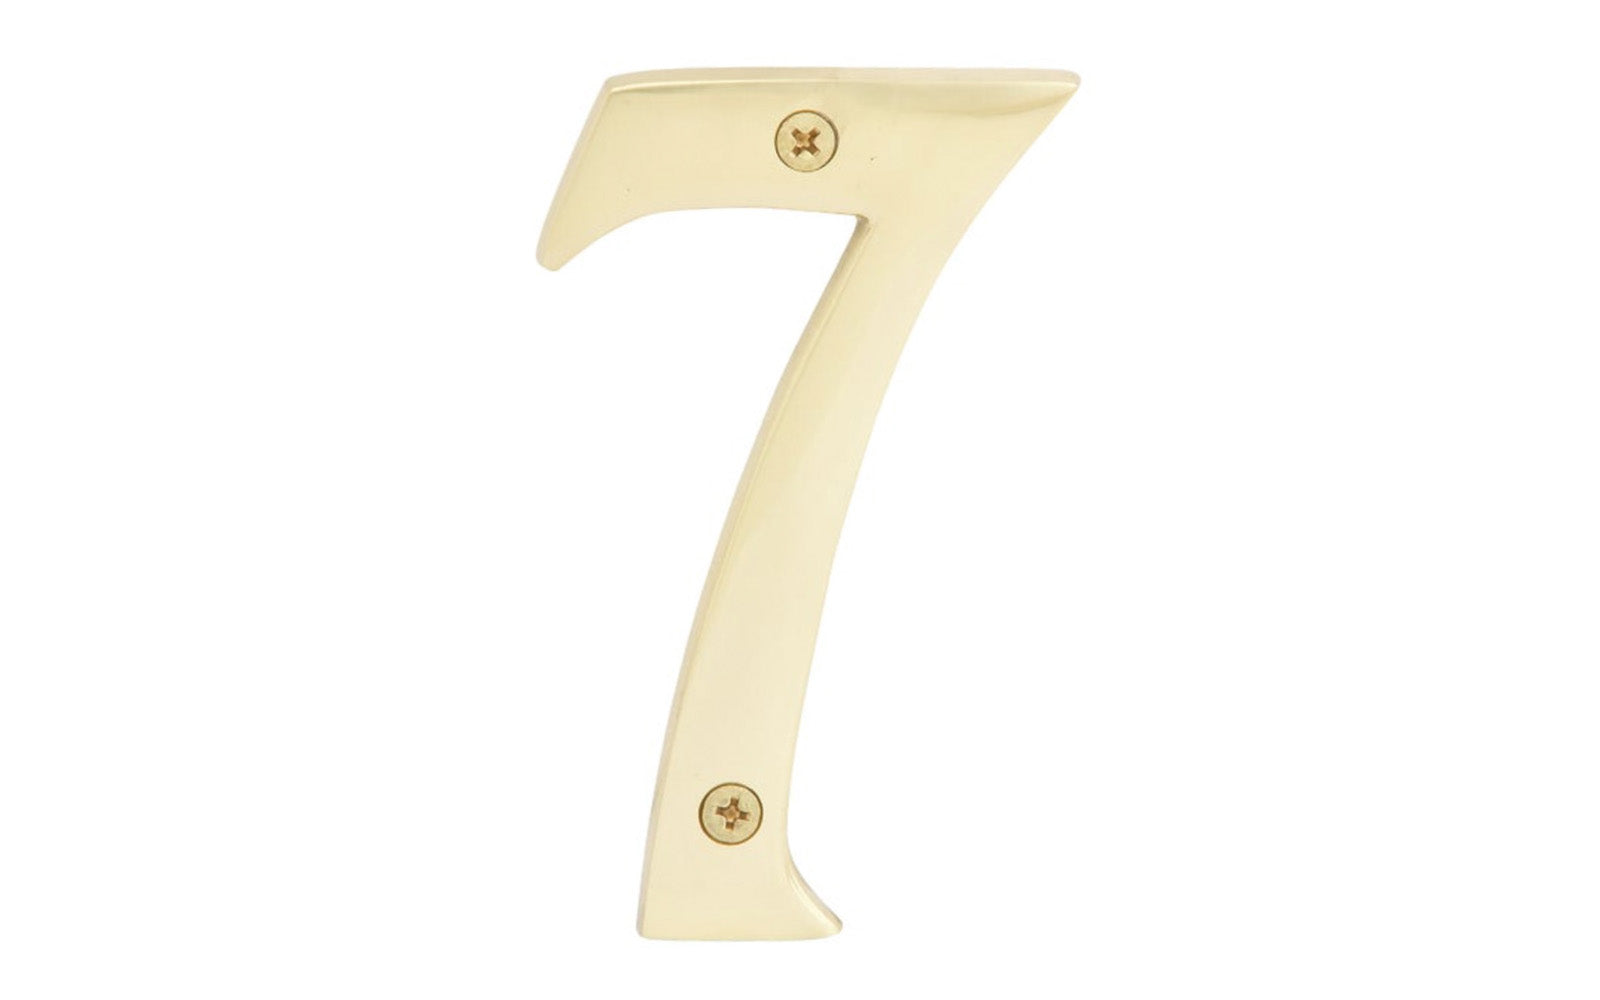 Number Seven Solid Brass House Number in a 4" Size. Made of solid brass material - 1/4" thickness. Lacquered brass finish. Includes two flat head phillips screws. #7 House Number. Hy-Ko Model No. BR-90/7. 029069104979